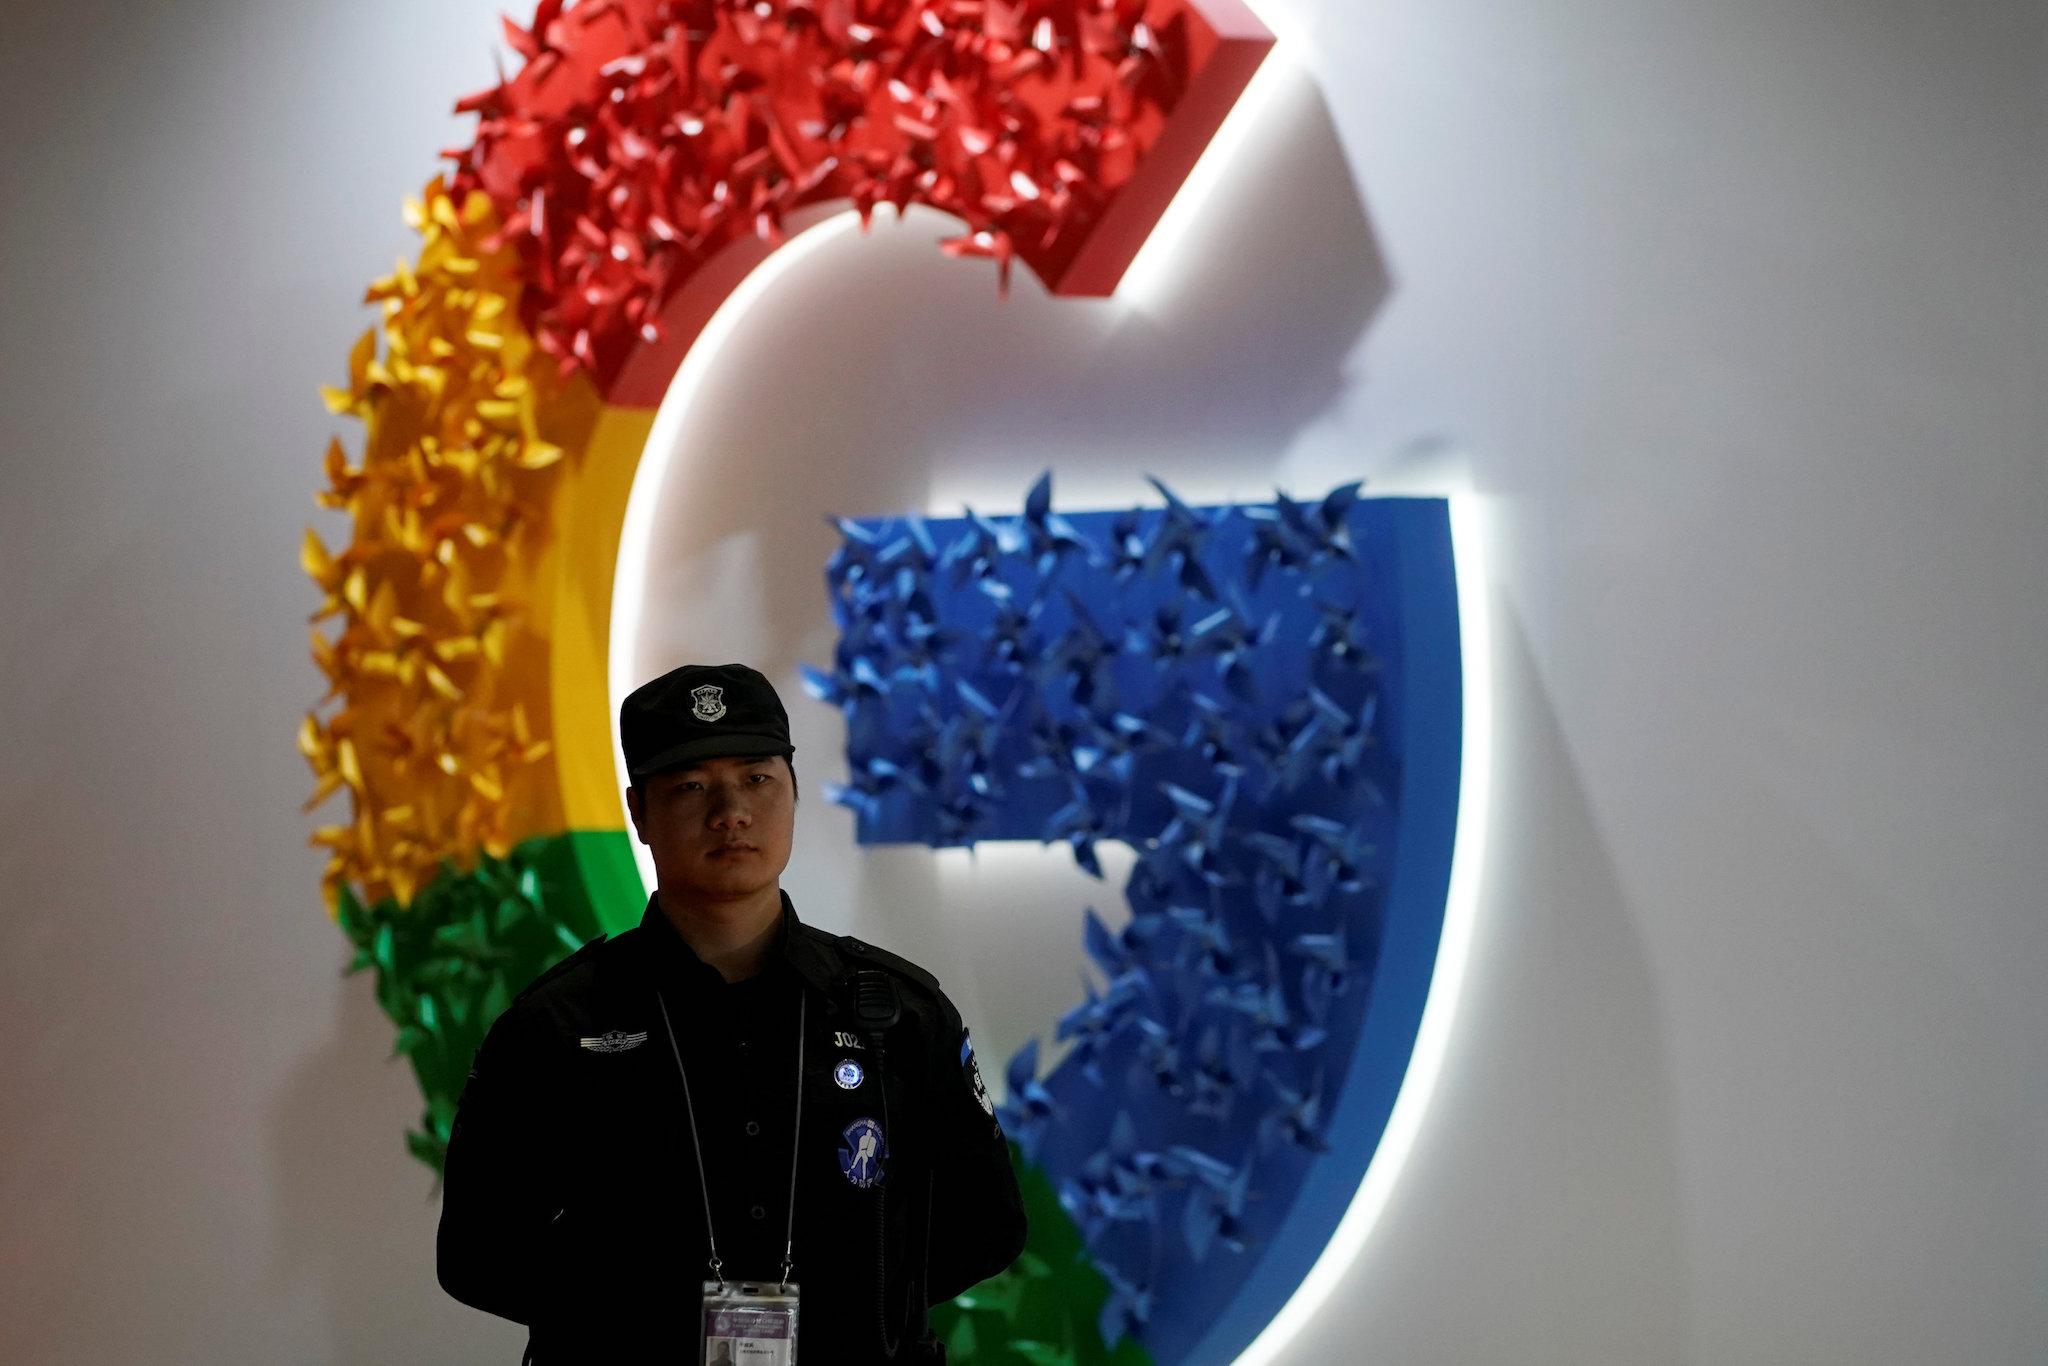 A Google sign is seen during the China International Import Expo (CIIE), at the National Exhibition and Convention Center in Shanghai, China